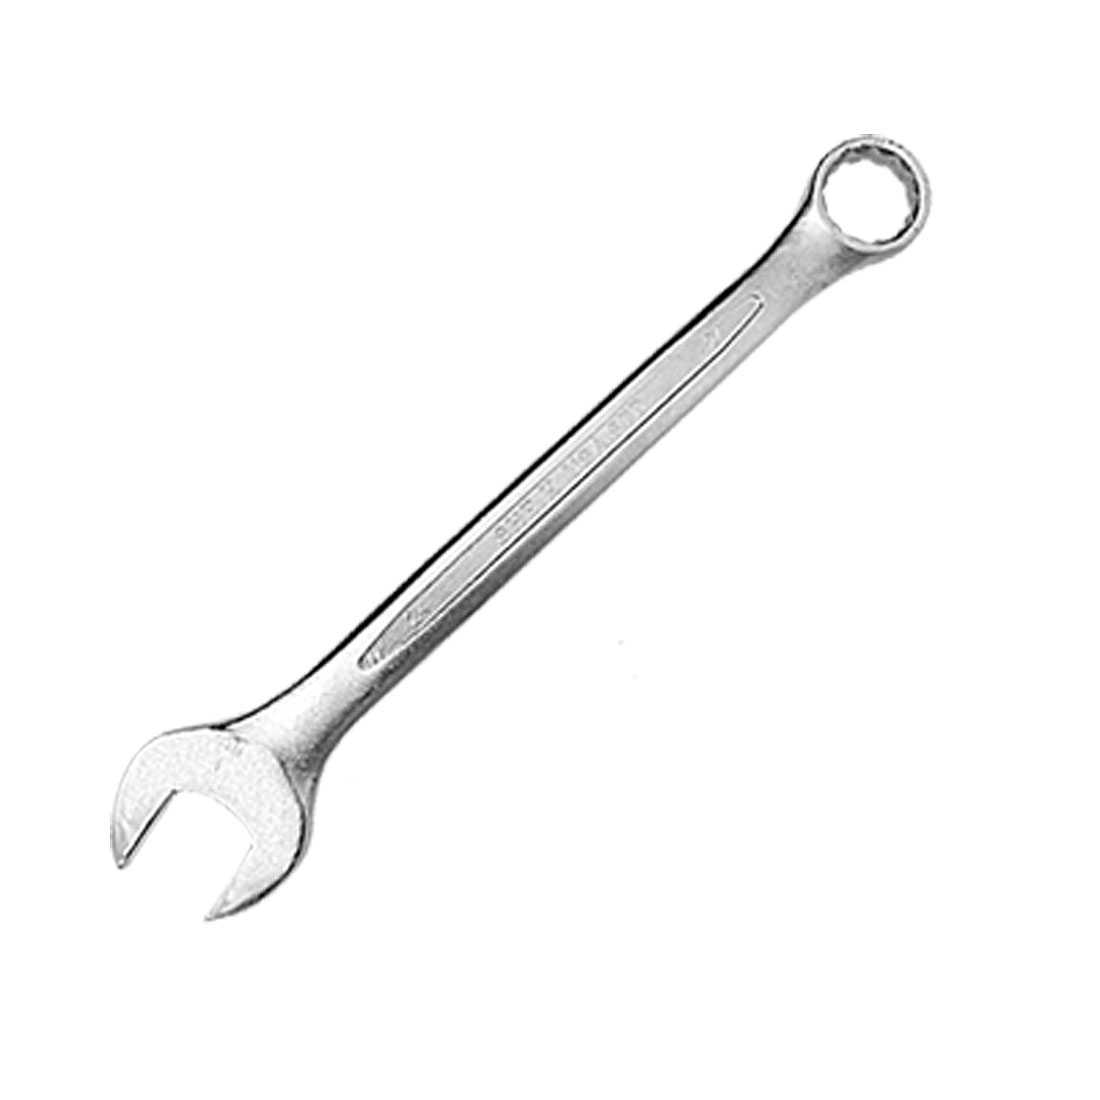 Unique Bargains 22mm 24mm Double-ended Box End Wrench Spanner 12 point